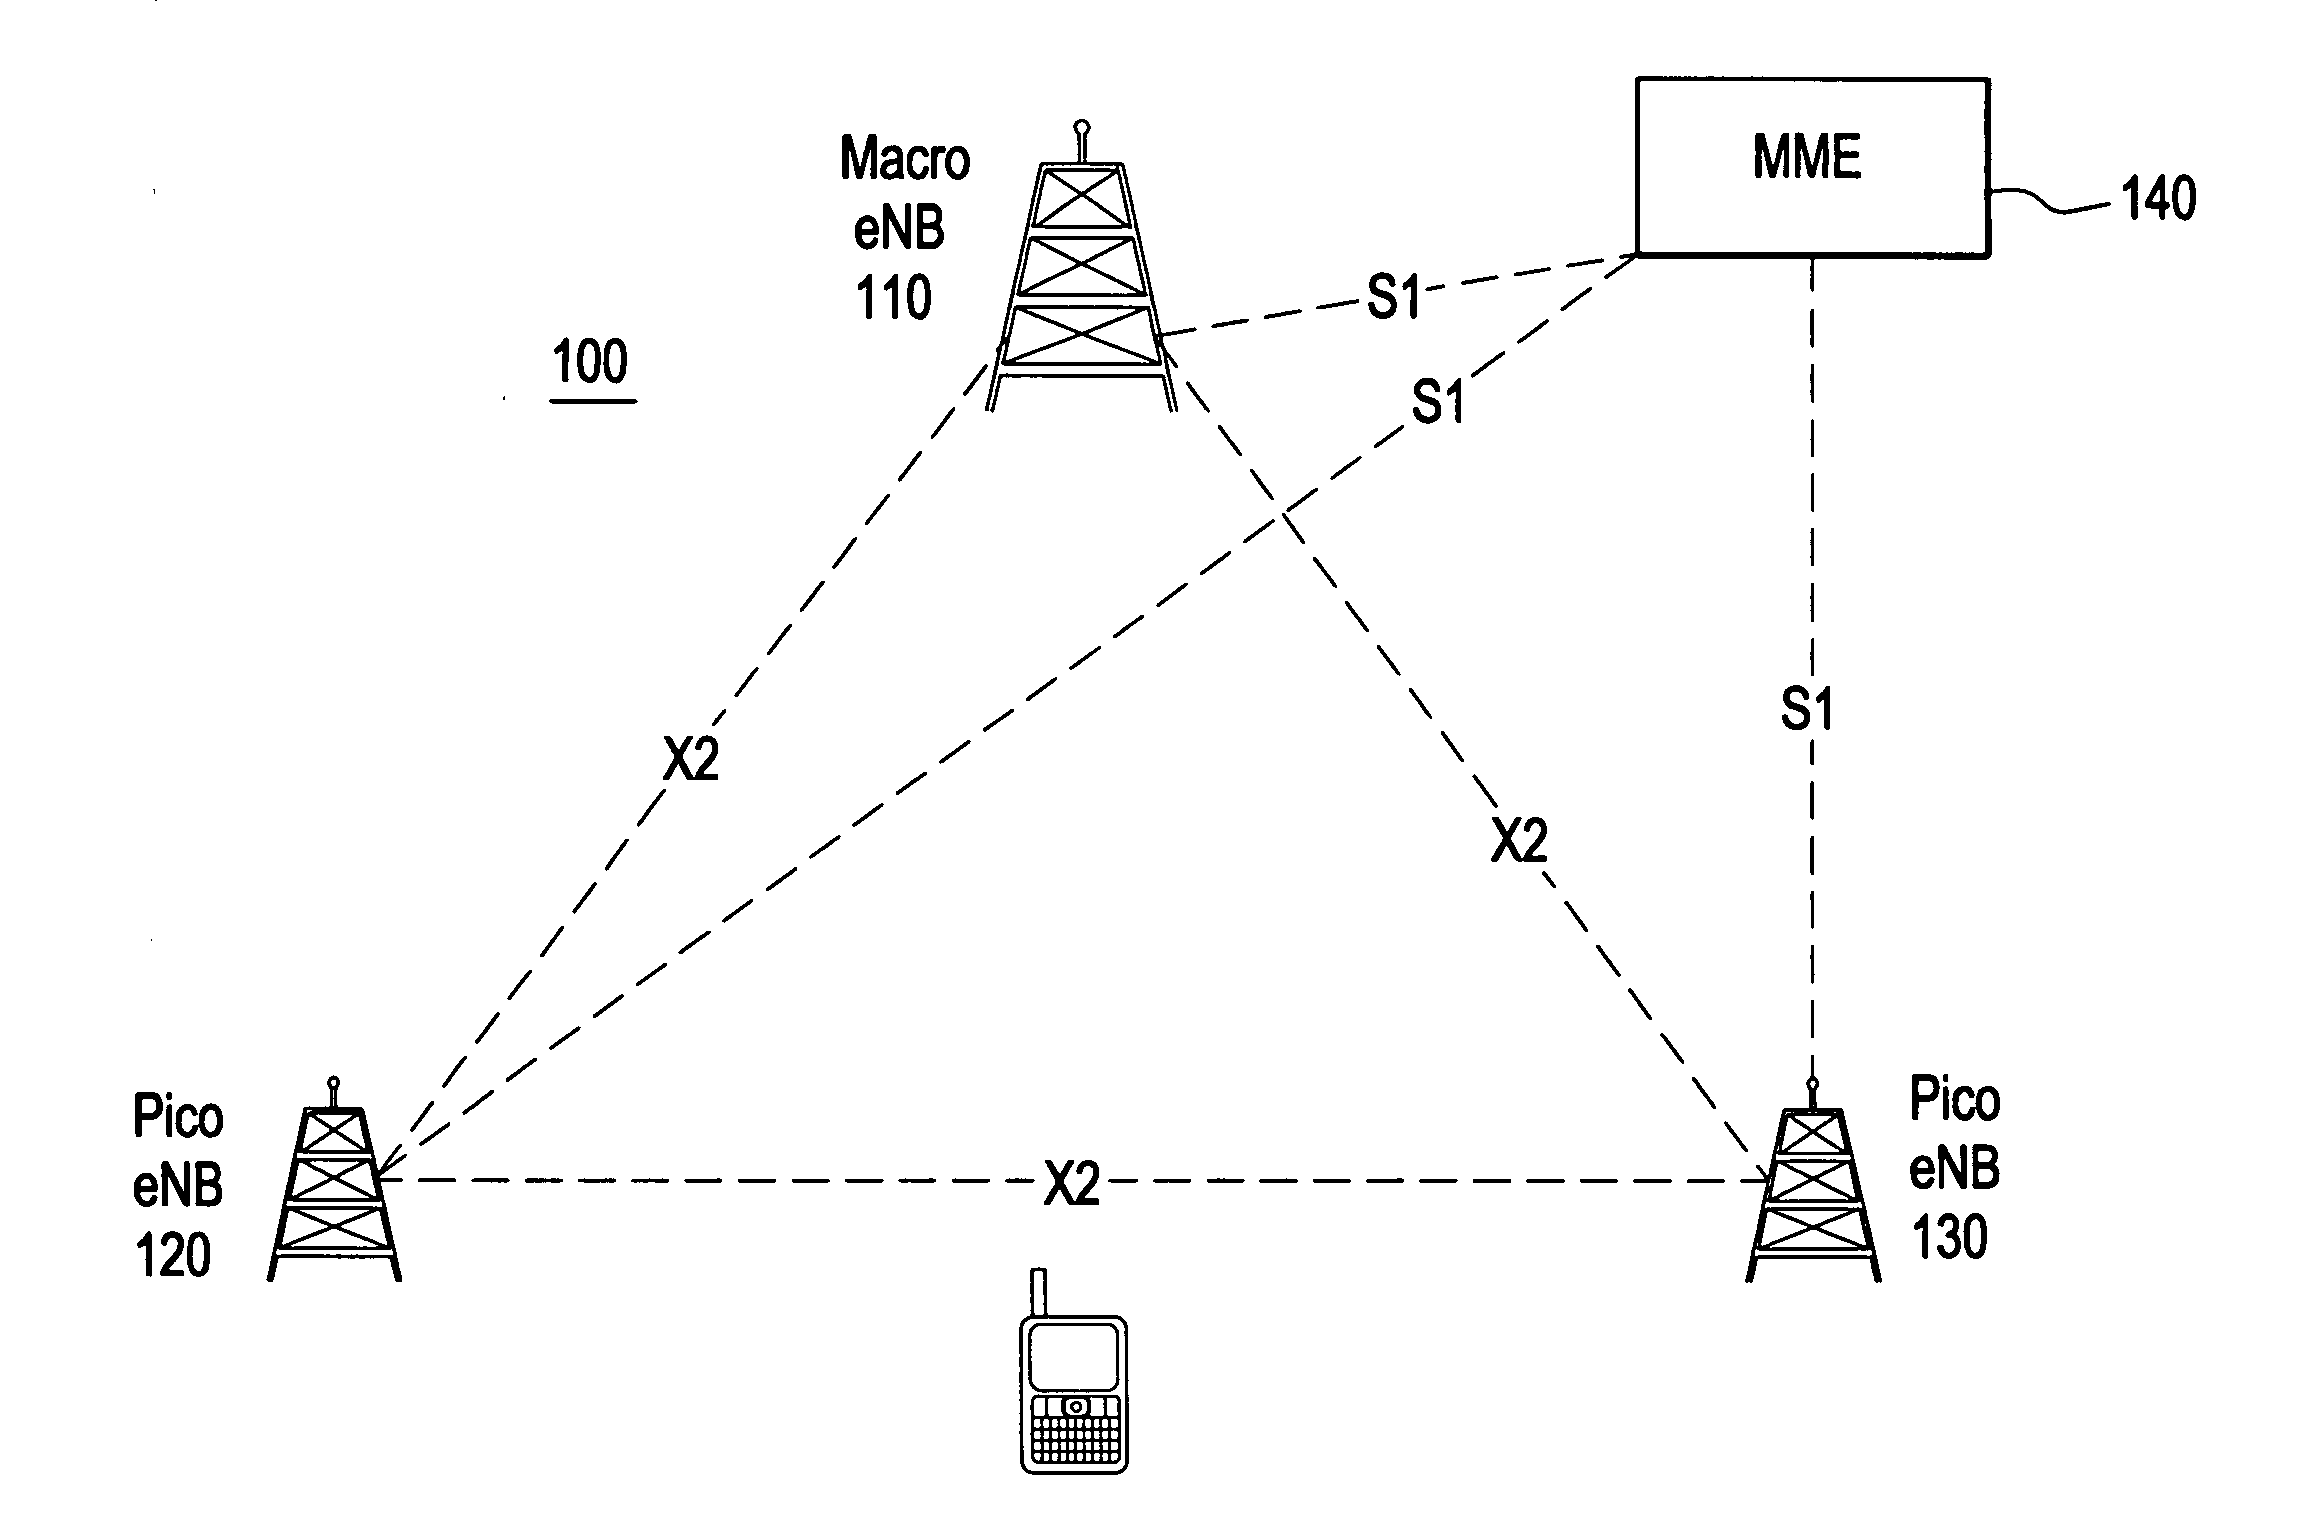 Radio access network defined paging area